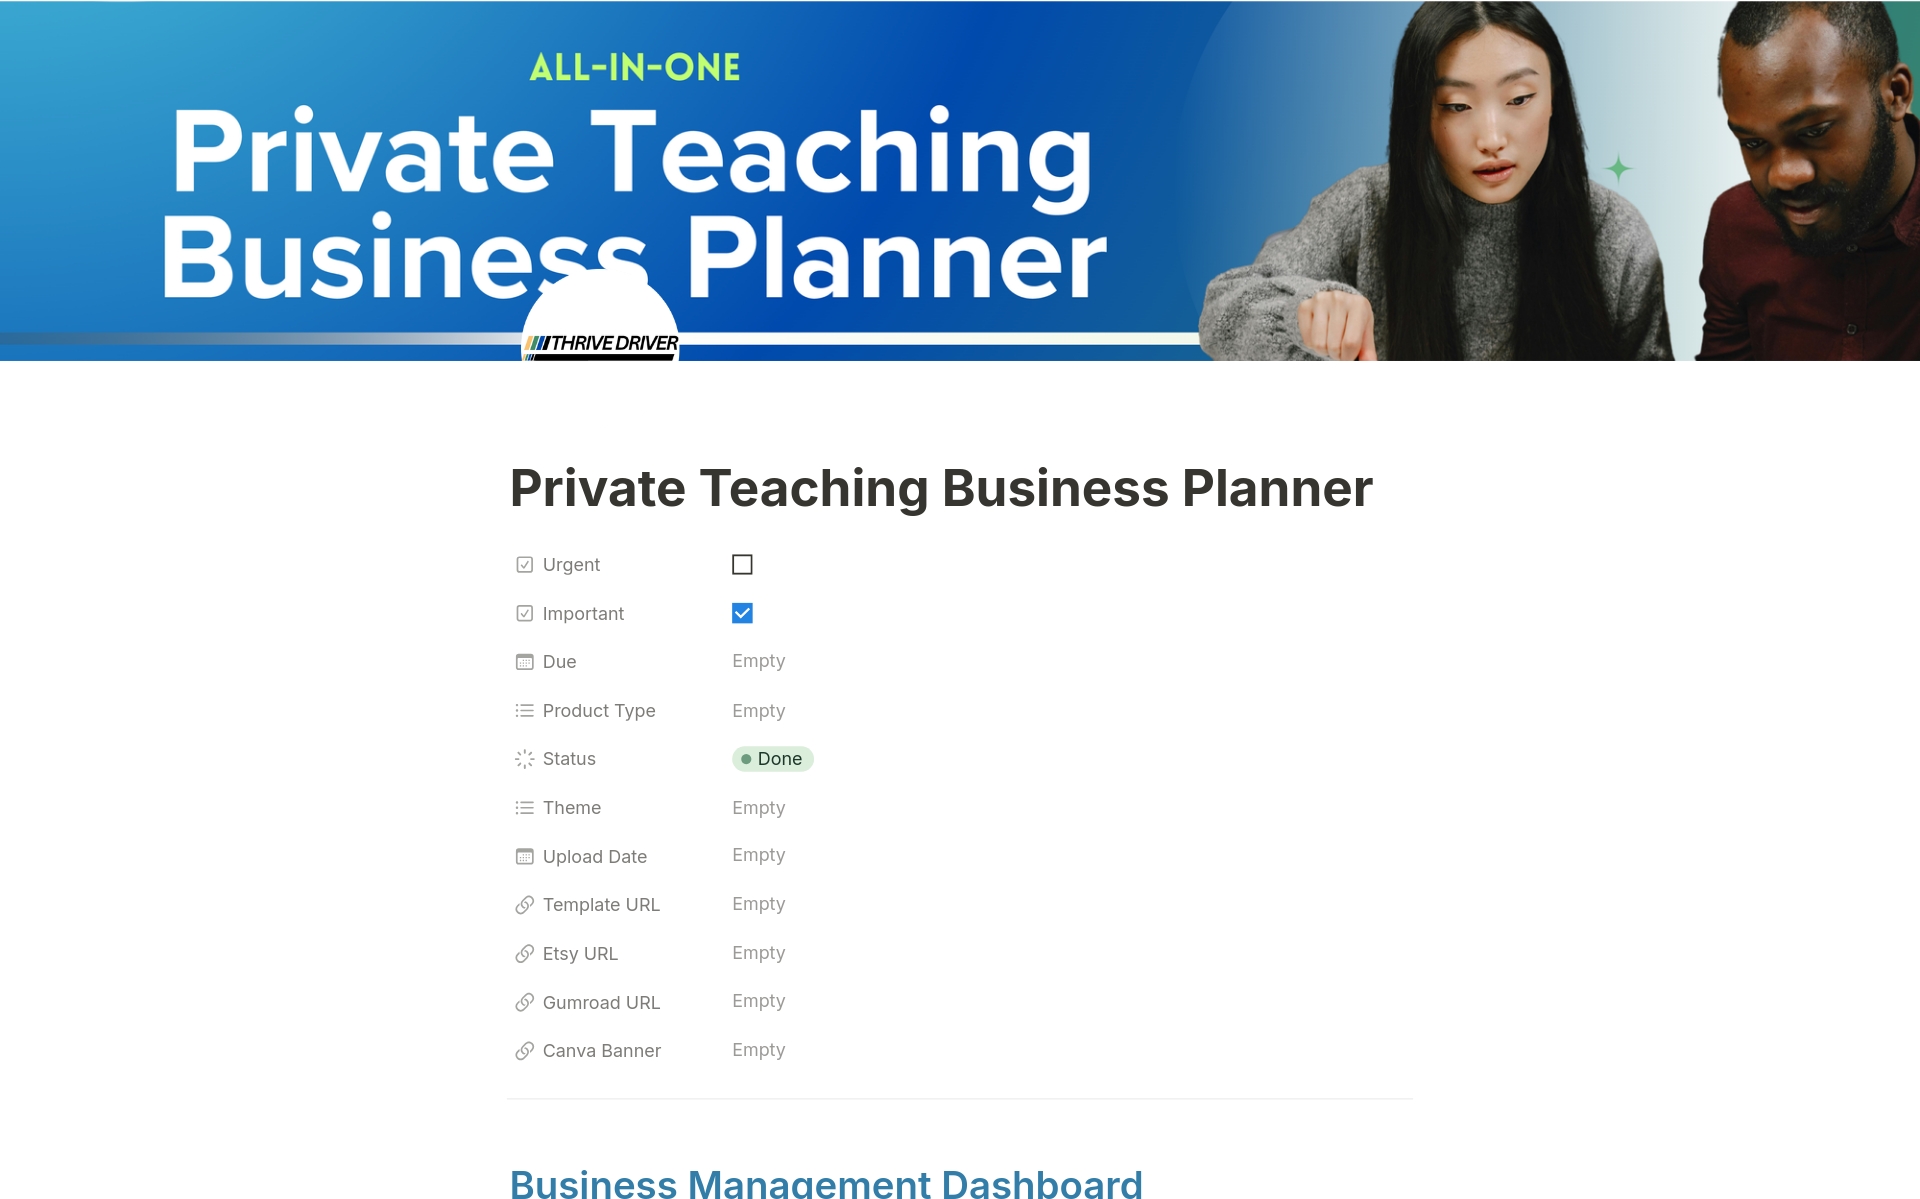 Get the template now to discover how every section is meticulously designed to supercharge your teaching business like never before! You can: schedule appointments, provide unique client portals, manage communication, track expenses & income.
